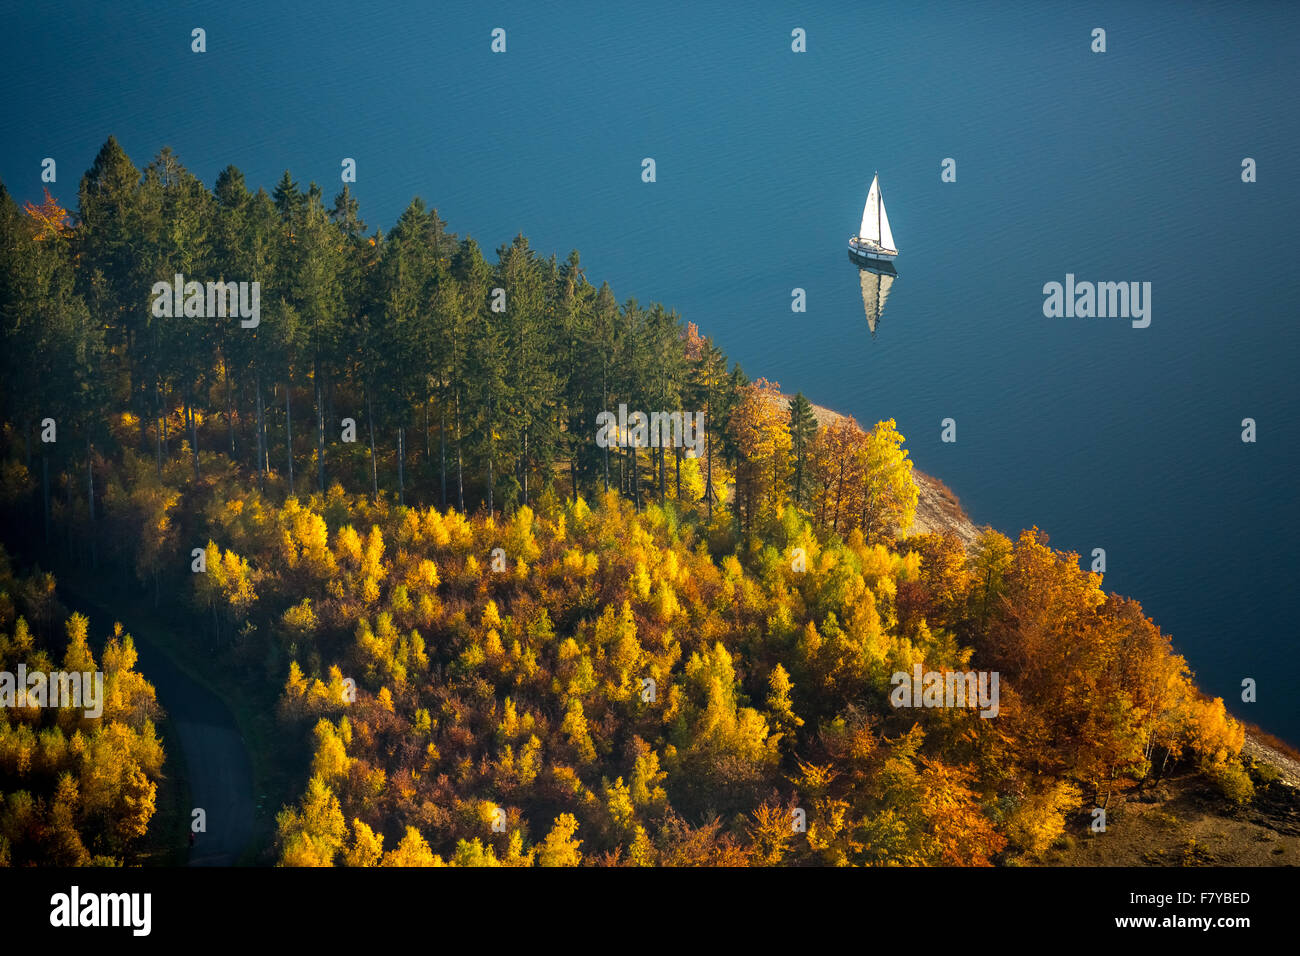 Biggest lake, shore of the lake with autumnal deciduous forest and a sail boat, Attendorn, Sauerland, North Rhine-Westphalia Stock Photo